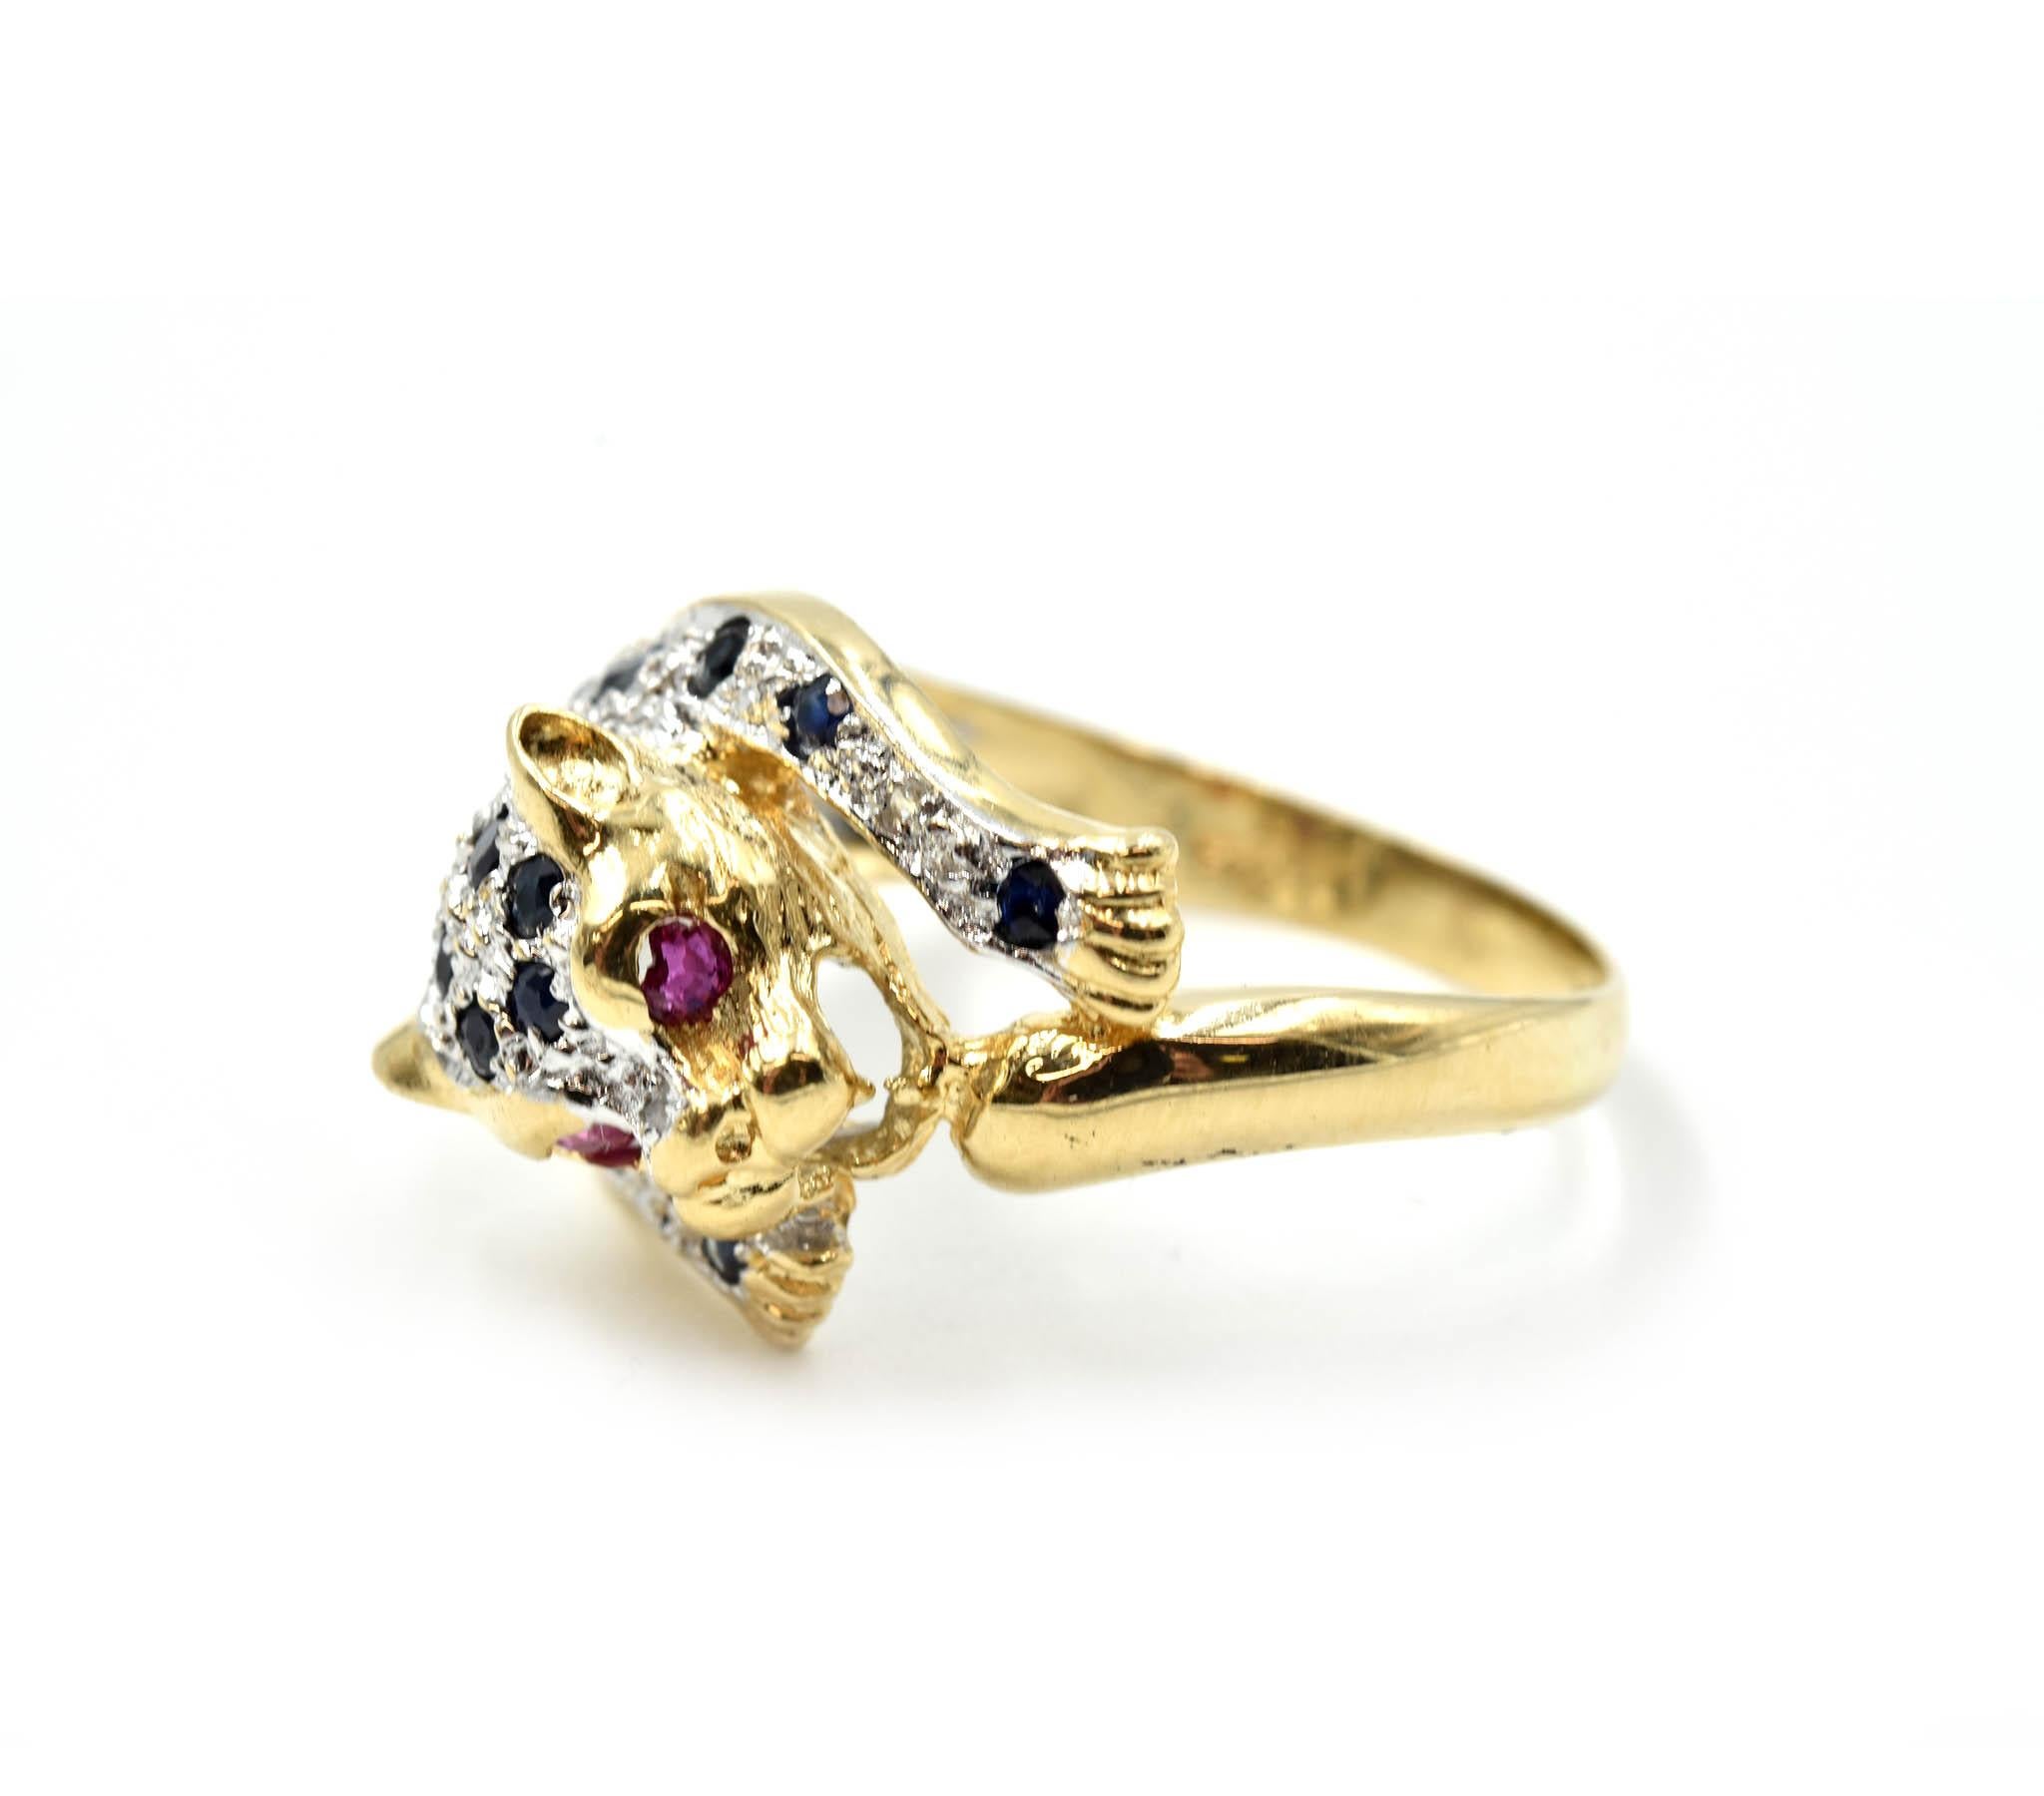 Designer: custom design
Material: 14k yellow gold
Sapphires: 22 round brilliant cuts = 0.44 carat total weight
Rubies: two rubies = 0.06 carat total weight
Dimensions: ring top is 1/2-inches long and 3/4-inches wide
Ring Size: 6 3/4 (please allow